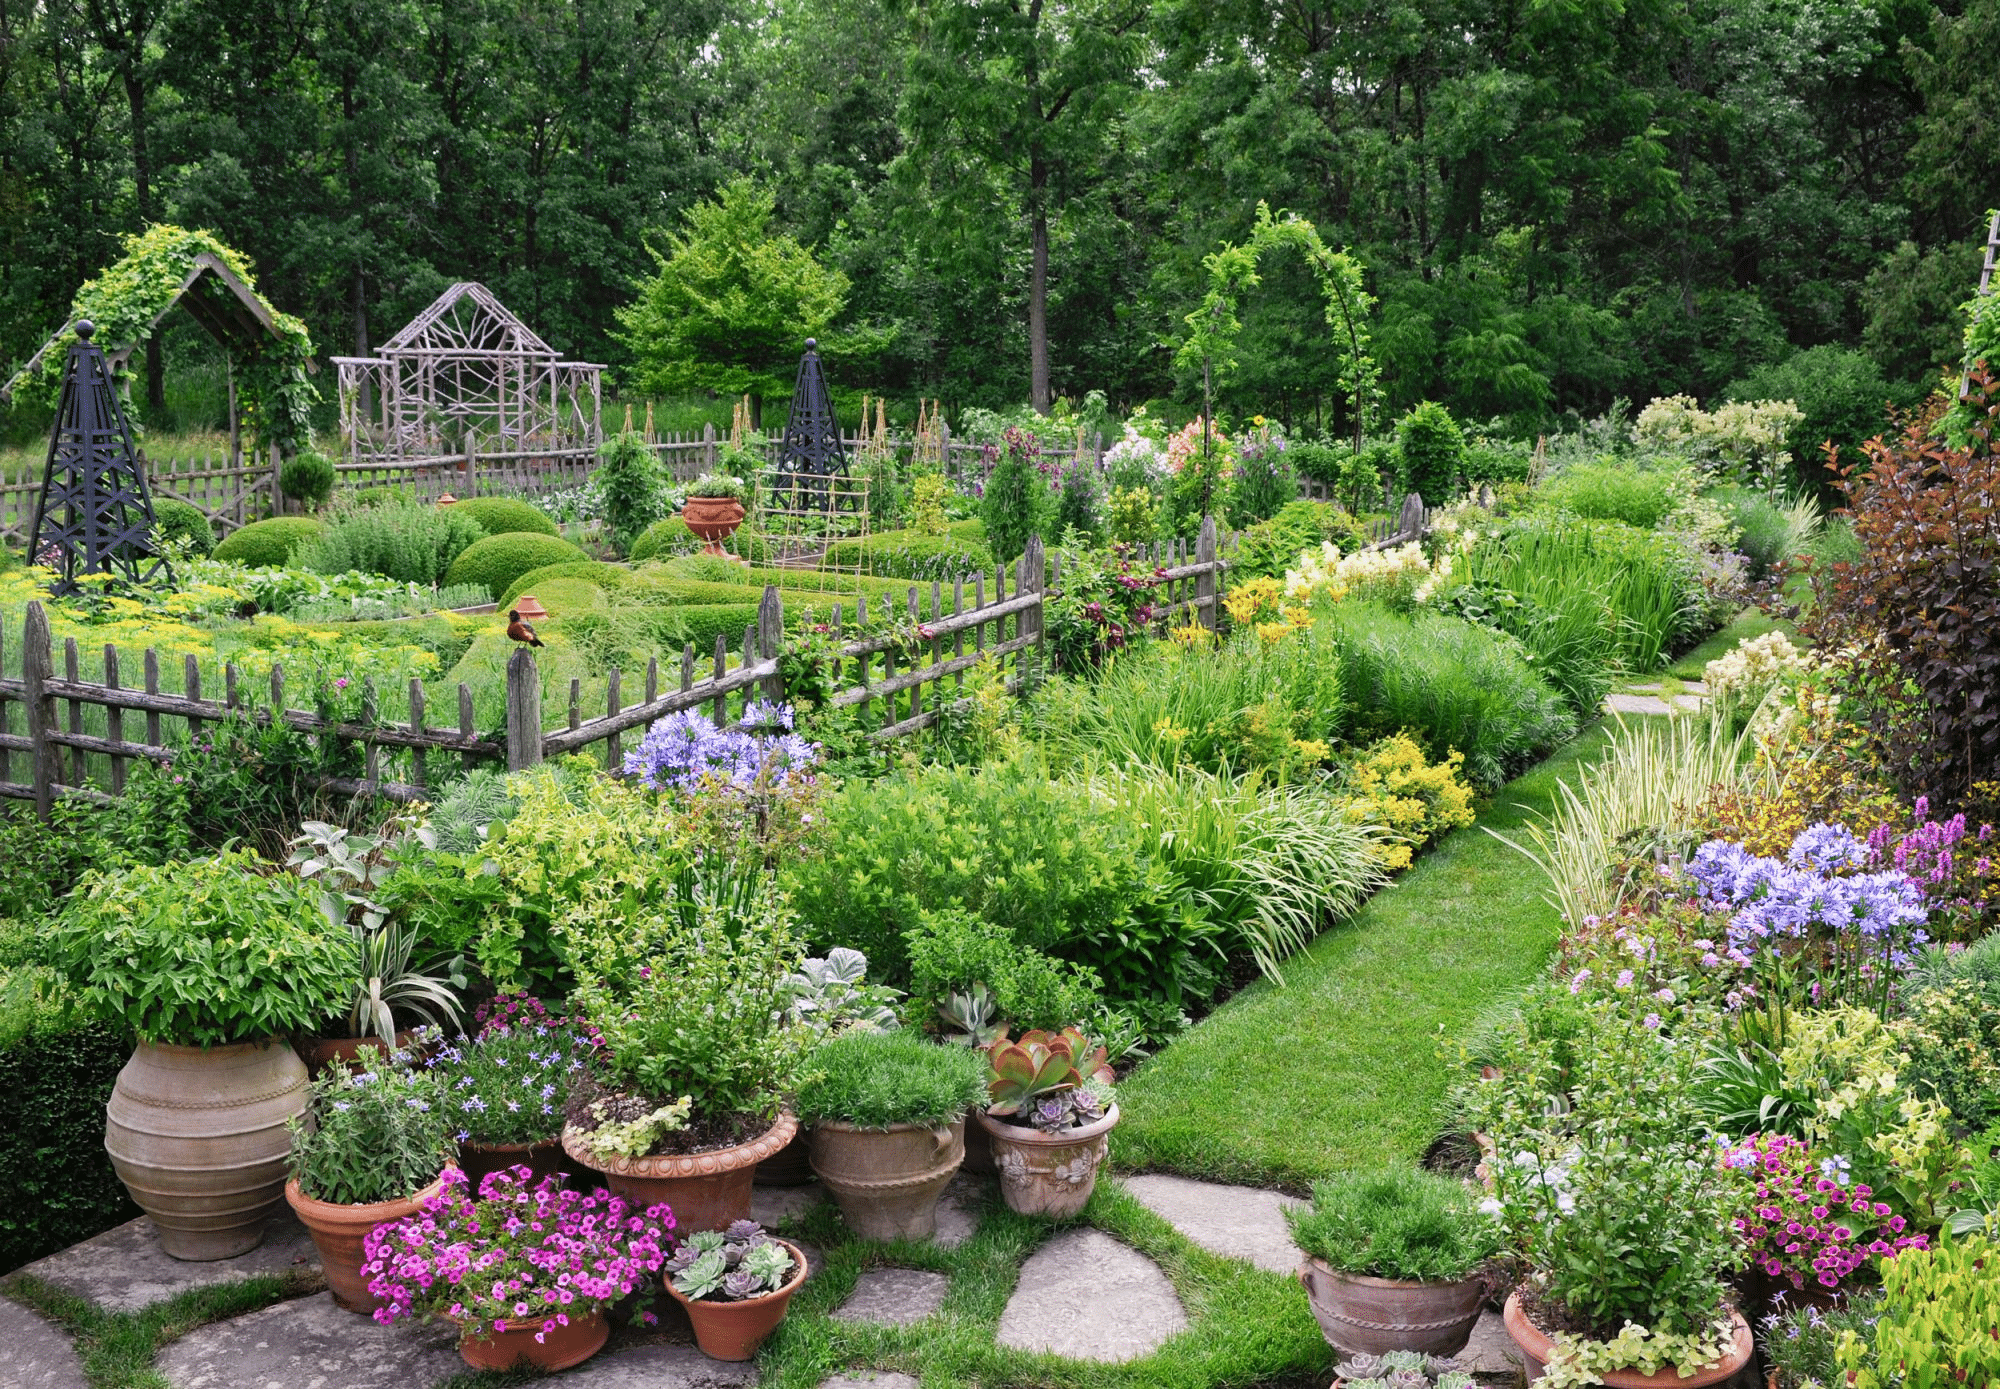 Backyard garden with variety of plants and flowers